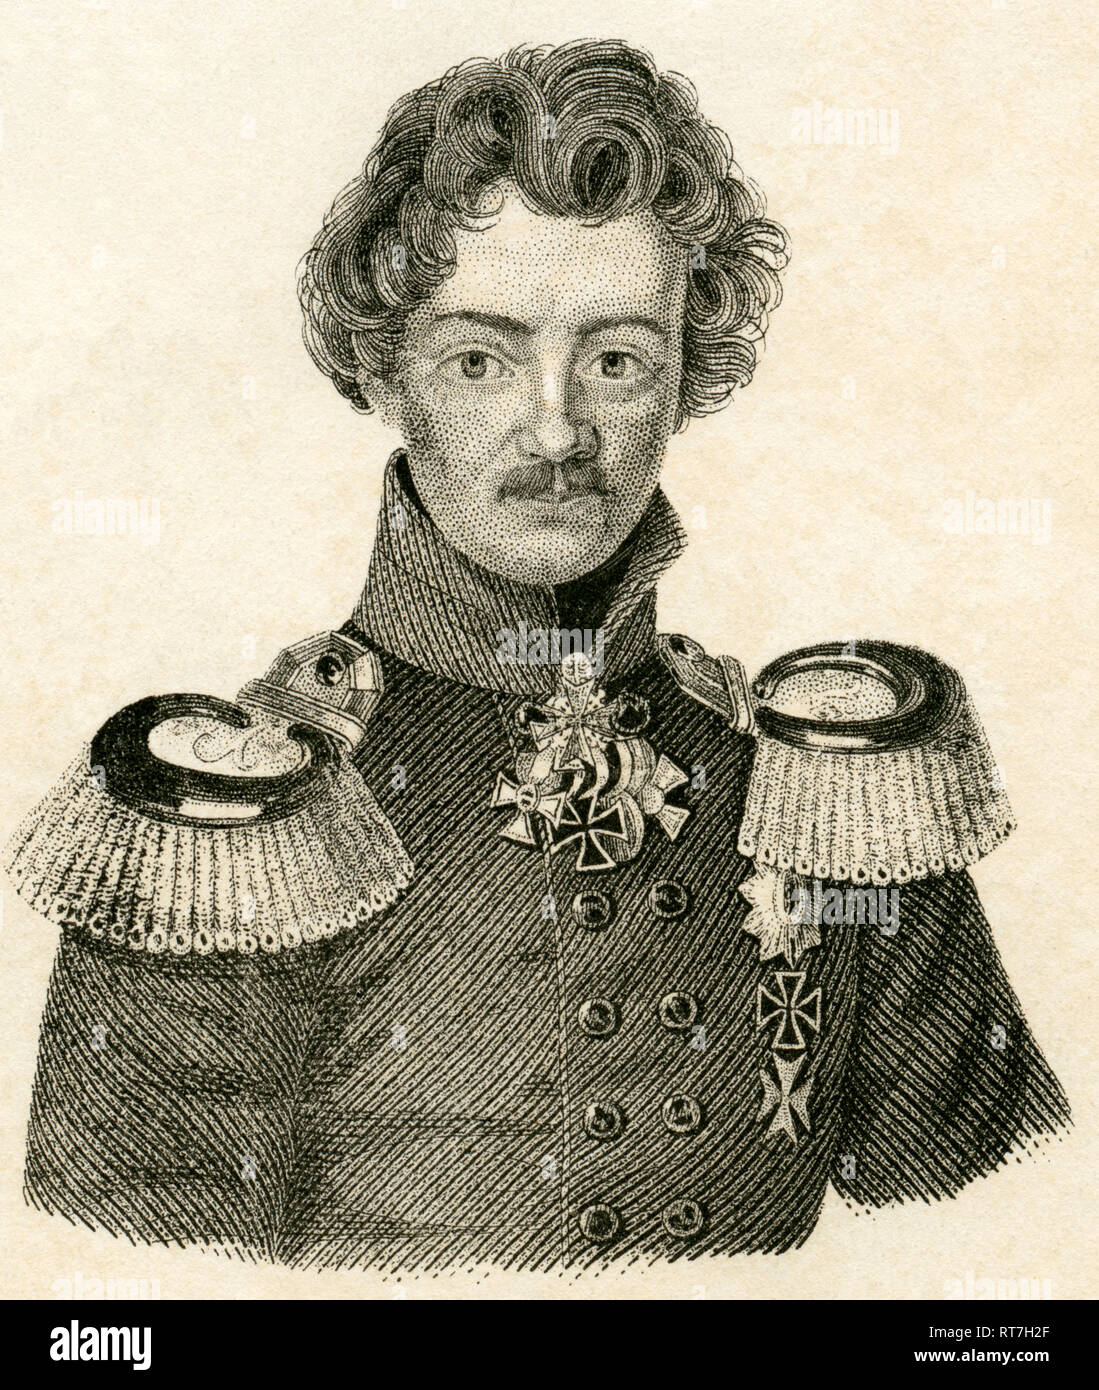 Duke Charles of Mecklenburg-Strelitz, Prussian soldier, brother of Queen Luise of Prussia, steel engraving, about 1840., Artist's Copyright has not to be cleared Stock Photo